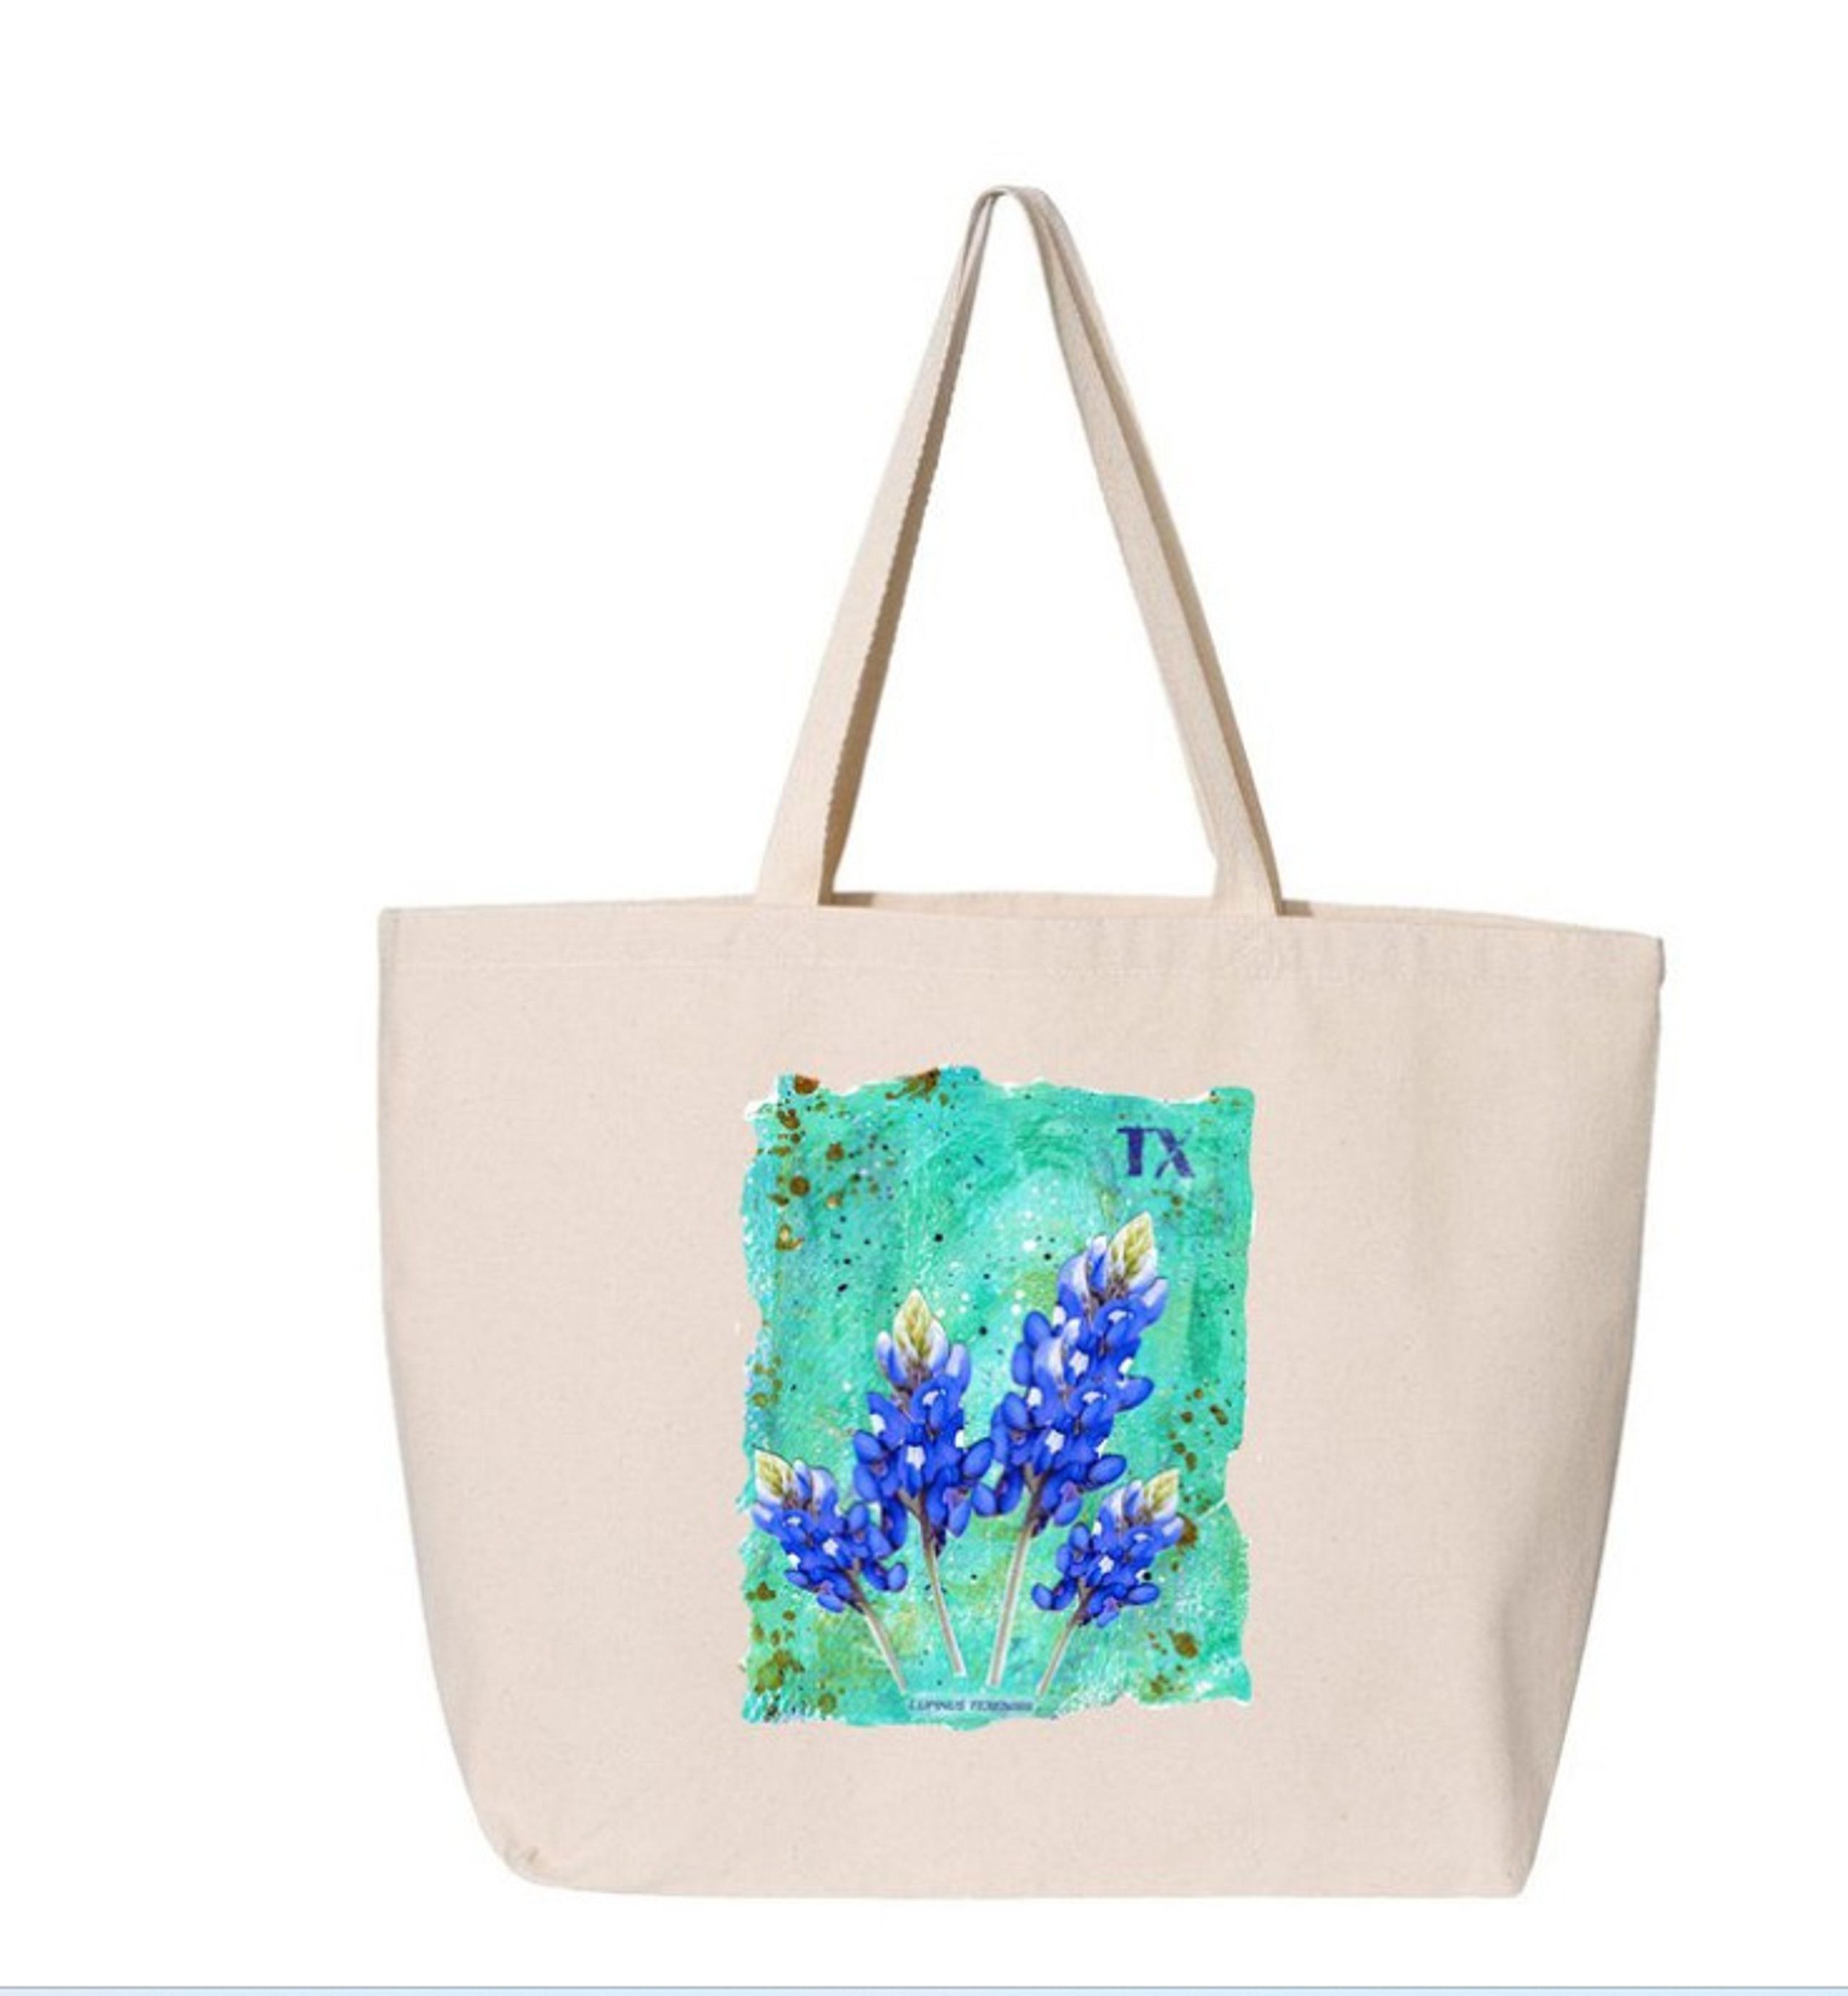 Jumbo Tote in 2 Colors with Bluebonnet Design